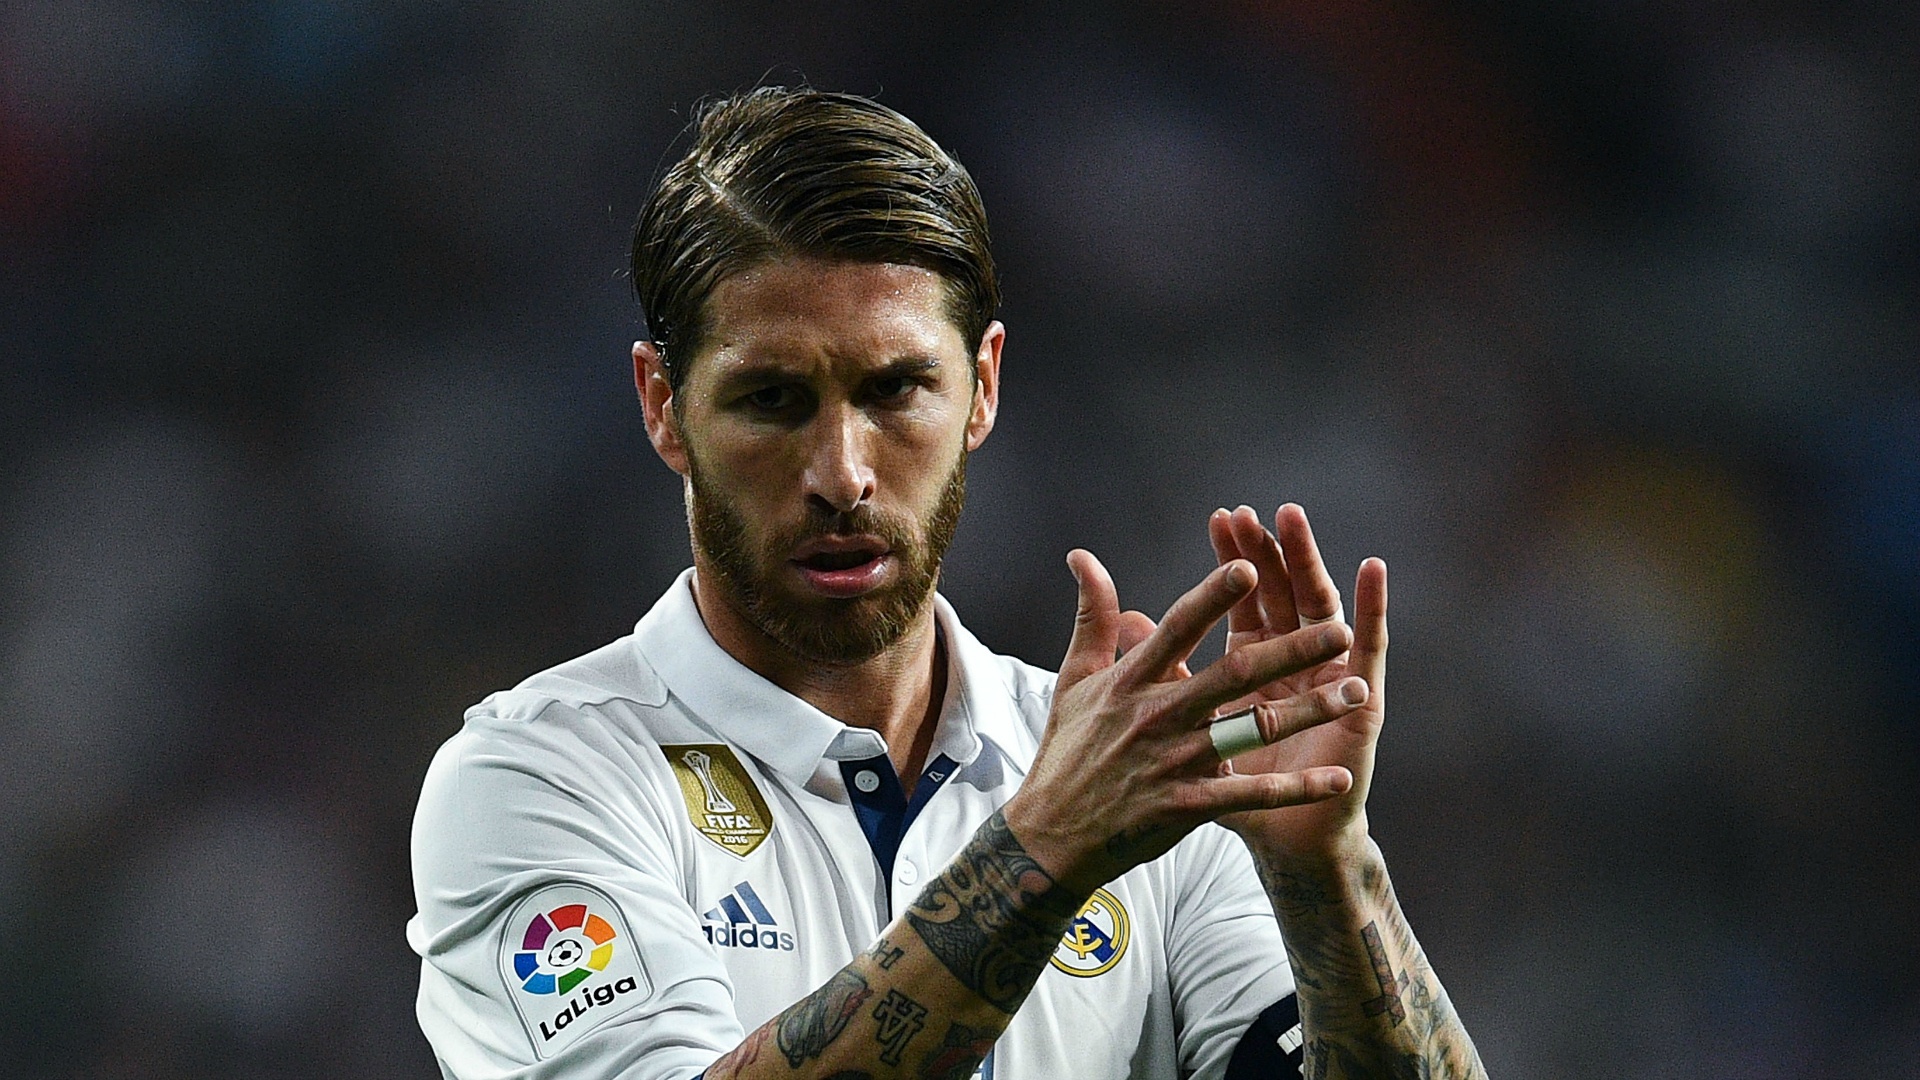 Ramos receives one-match ban for Messi foul in El Clasico